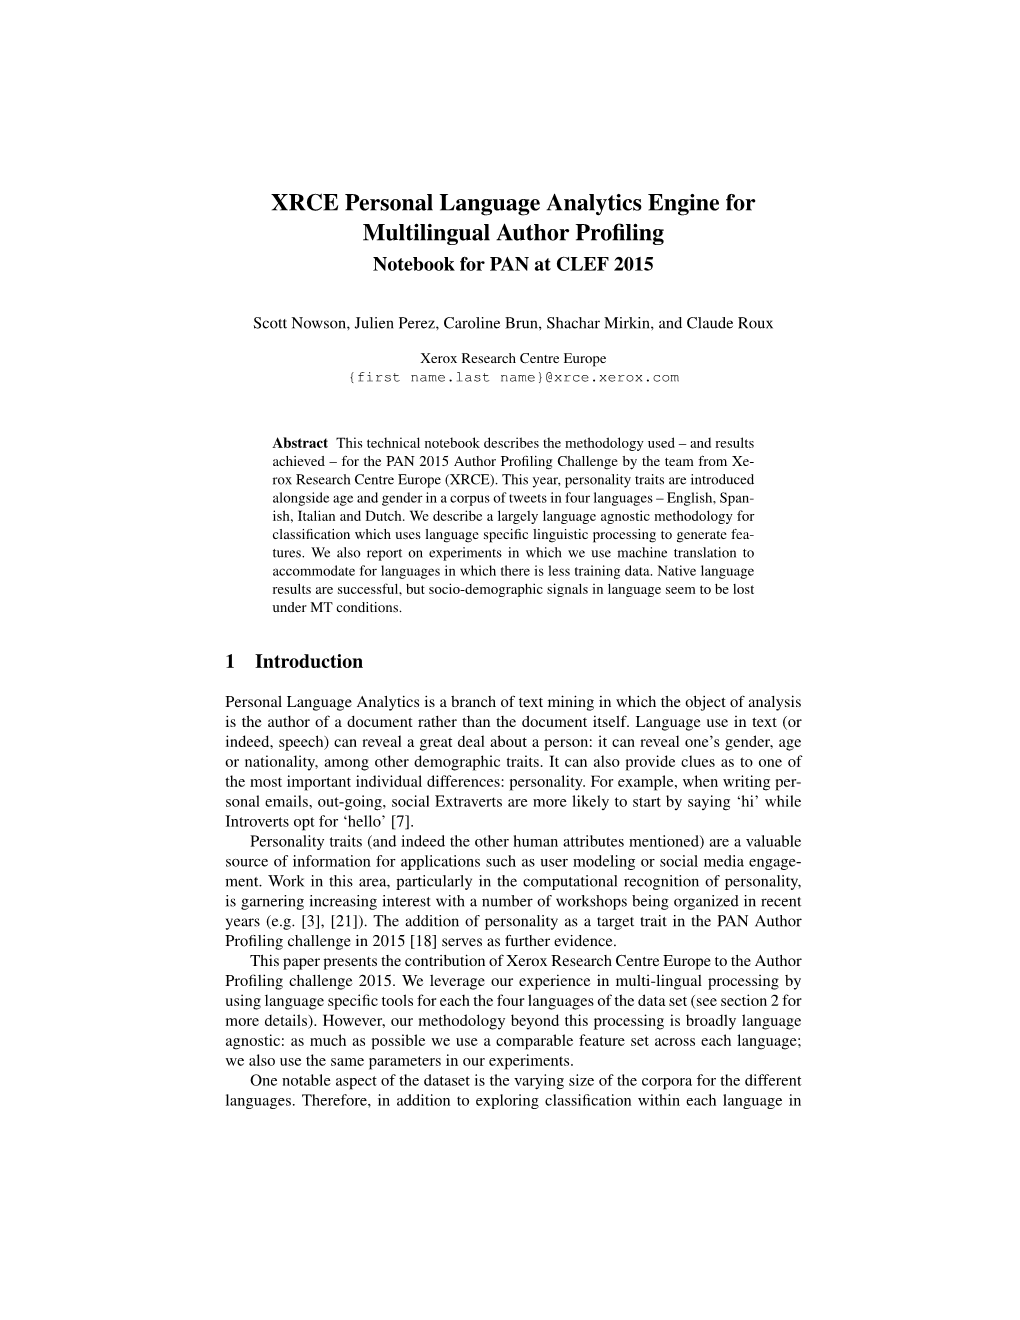 XRCE Personal Language Analytics Engine for Multilingual Author Proﬁling Notebook for PAN at CLEF 2015